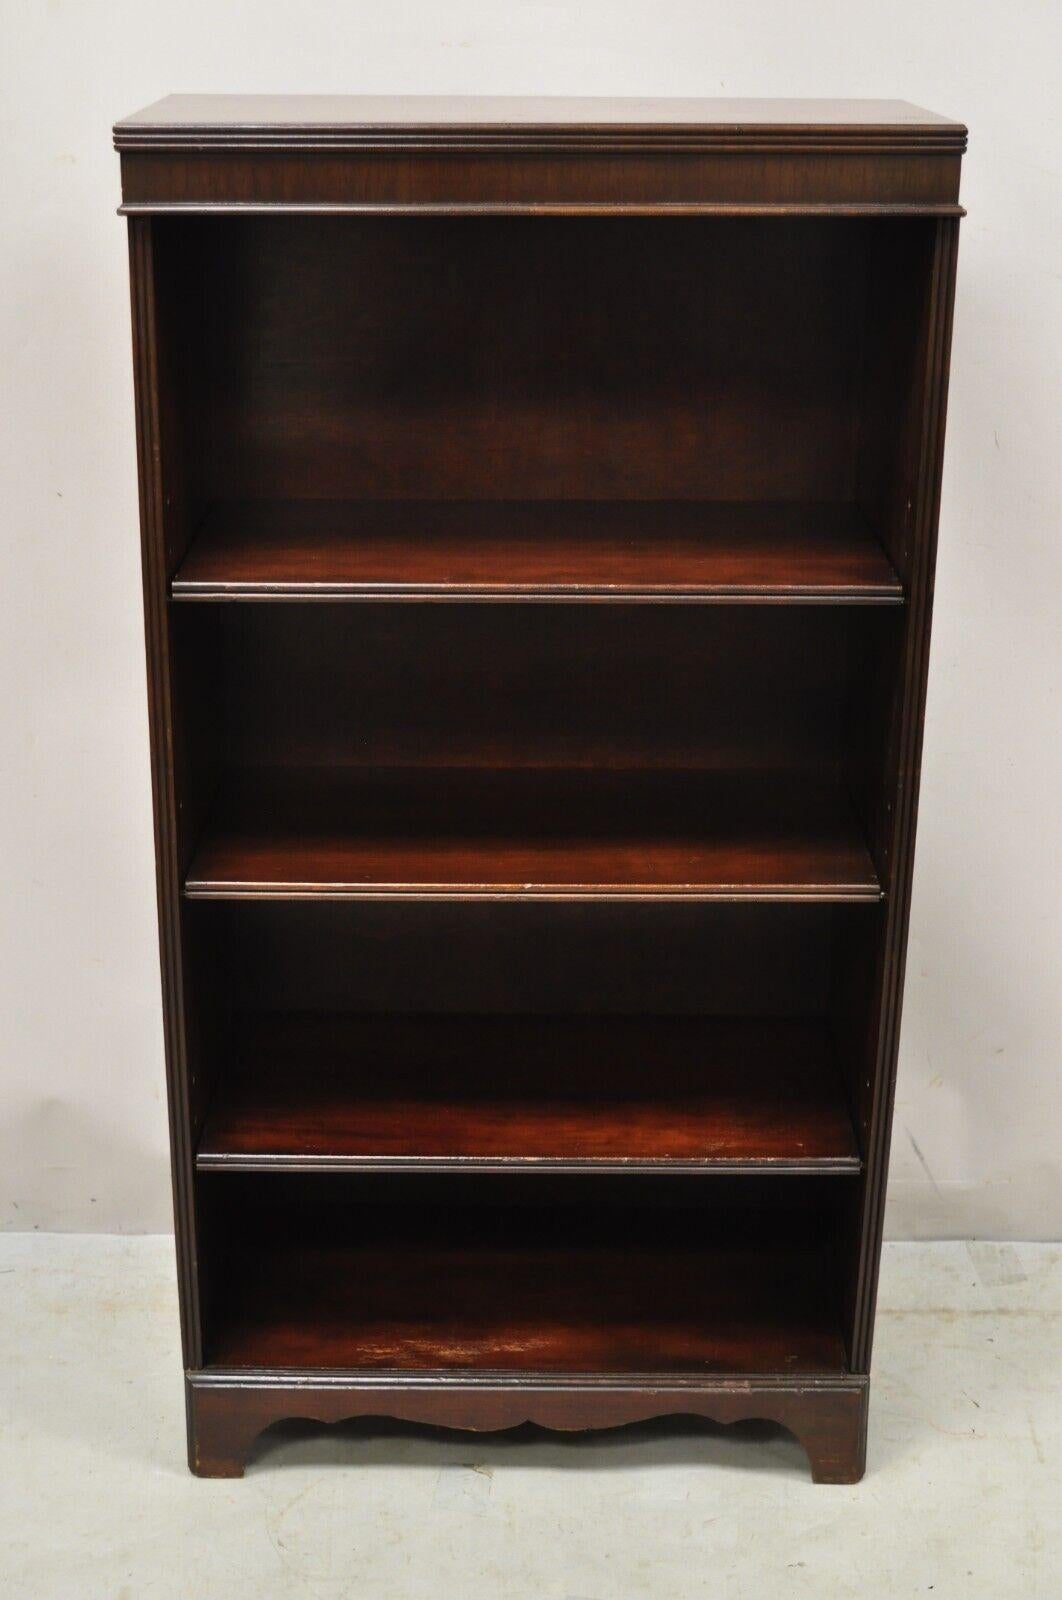 Vintage Mahogany Sheraton Style Open 3 Shelf Bookcase Bookshelf Stand. Item features beautiful wood grain, 3 adjustable shelves, very nice vintage item, quality American craftsmanship, great style and form. Circa Early to Mid 20th Century.